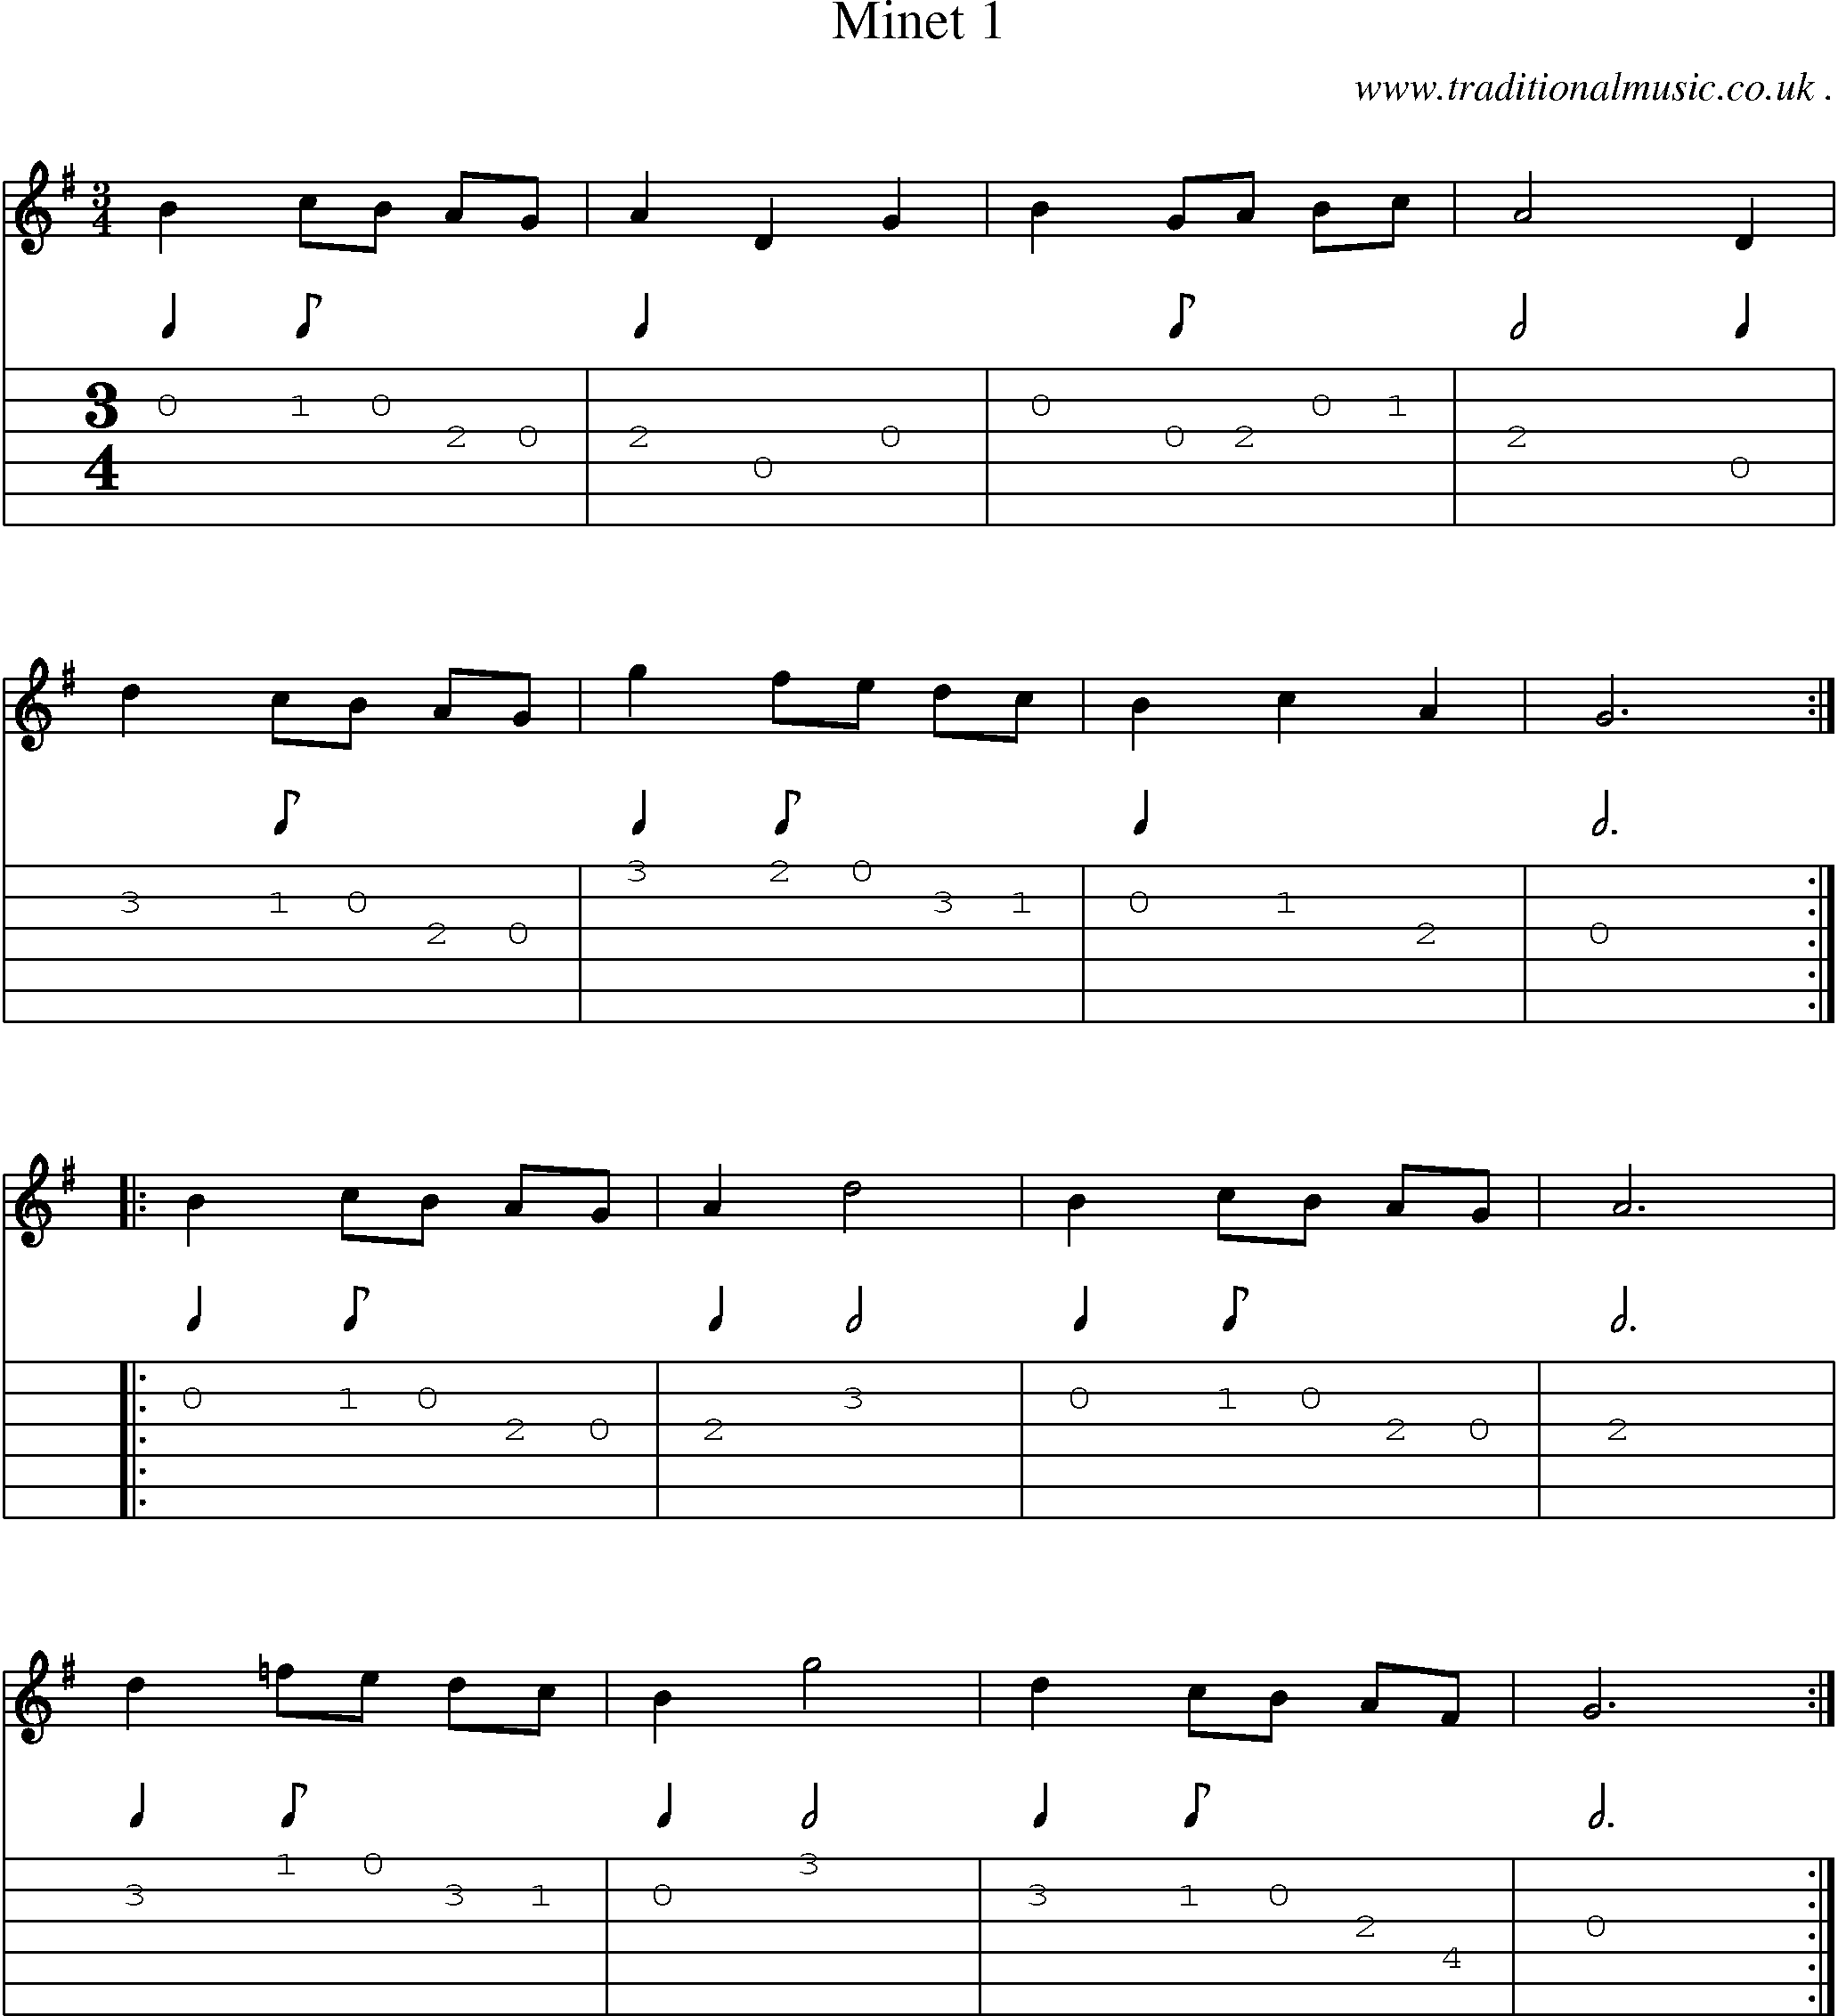 Sheet-Music and Guitar Tabs for Minet 1